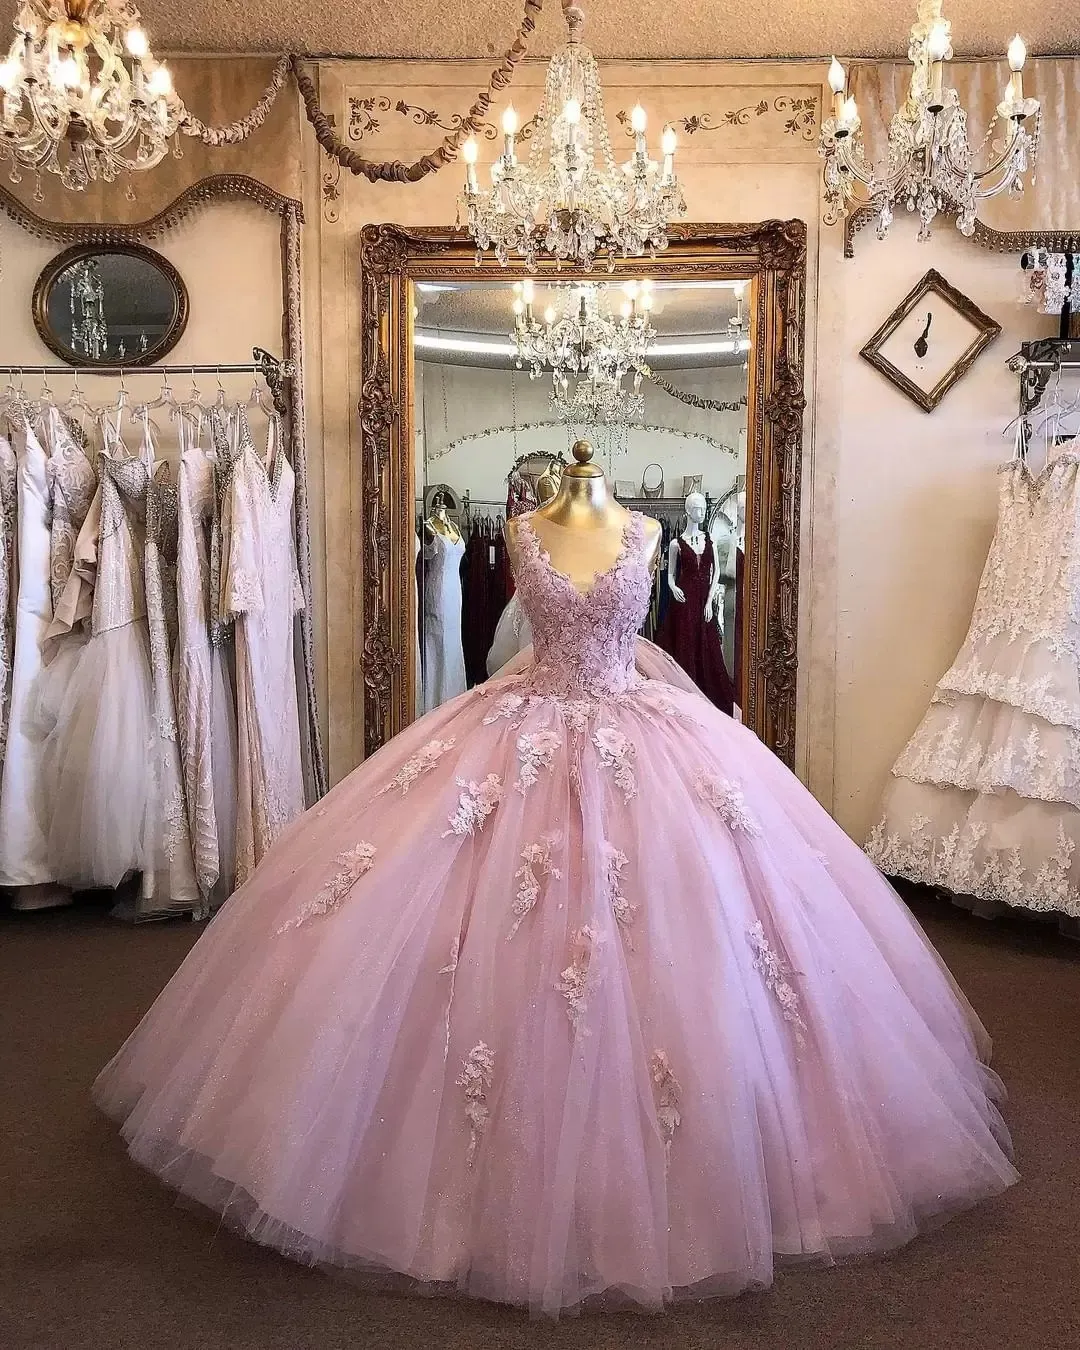 Dusty Rose Lace Appliques Ball Gown Wedding Dresses 2023 Sweetheart Beaded  Princess Bride Dresses Robe De Mariee 2024 from undefined, $216.29 | DHgate  Mobile